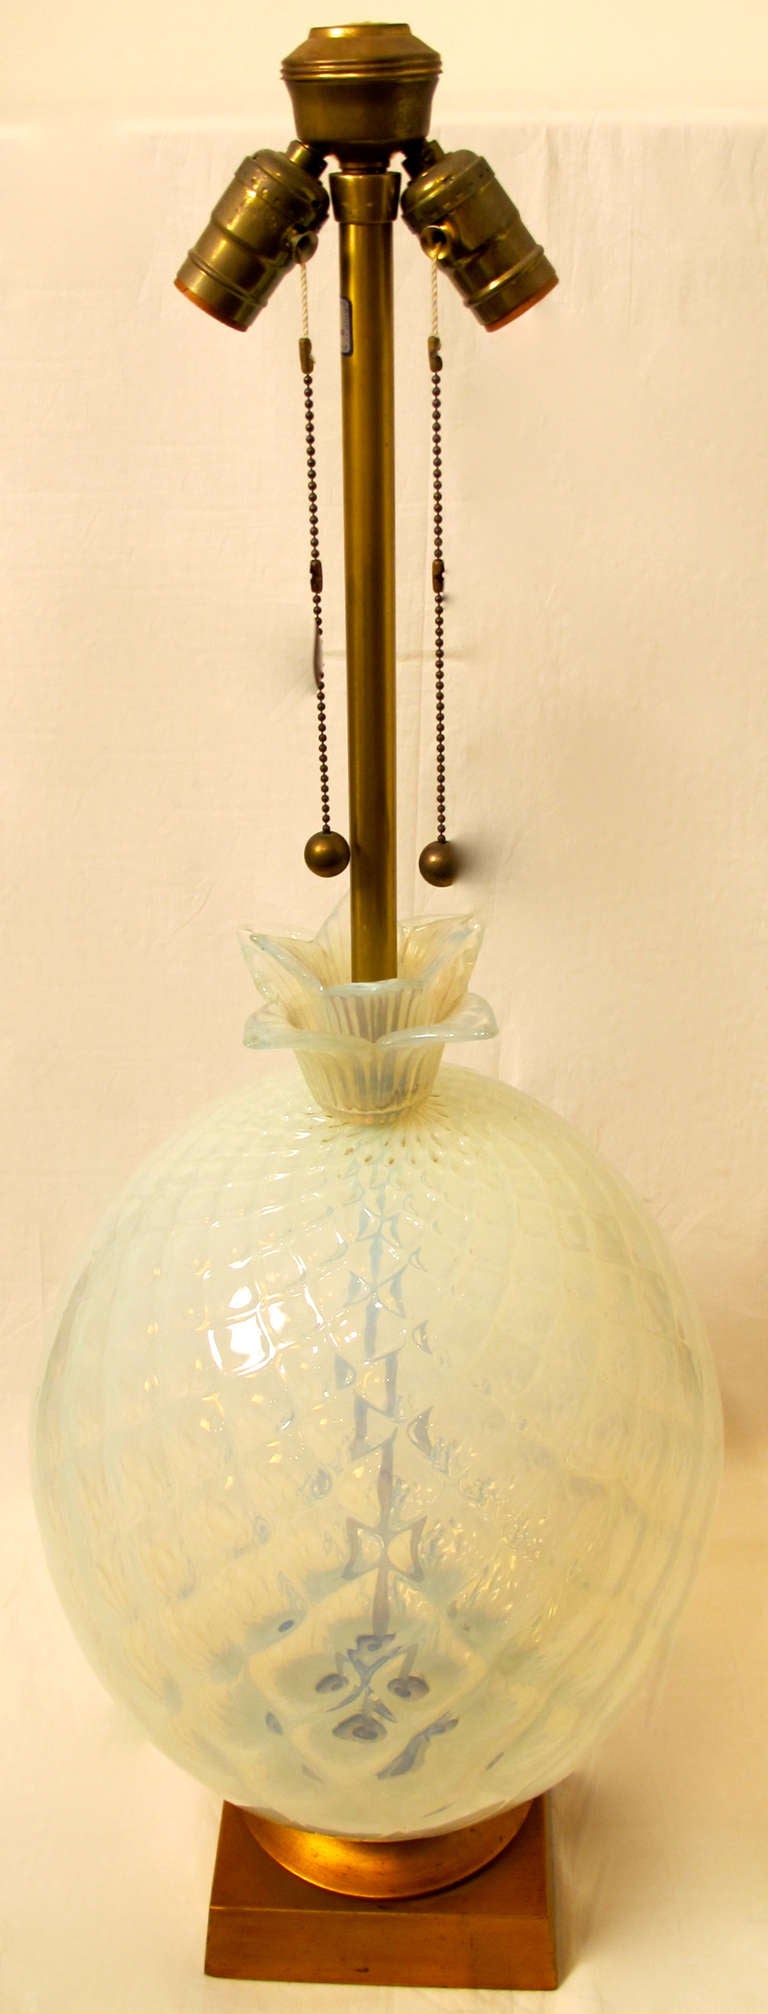 Large and exquisite opaline Murano glass lamp in a subtle pineapple shape. Retailed by Marbro, attributed to Seguso. Italy, mid 20th century.